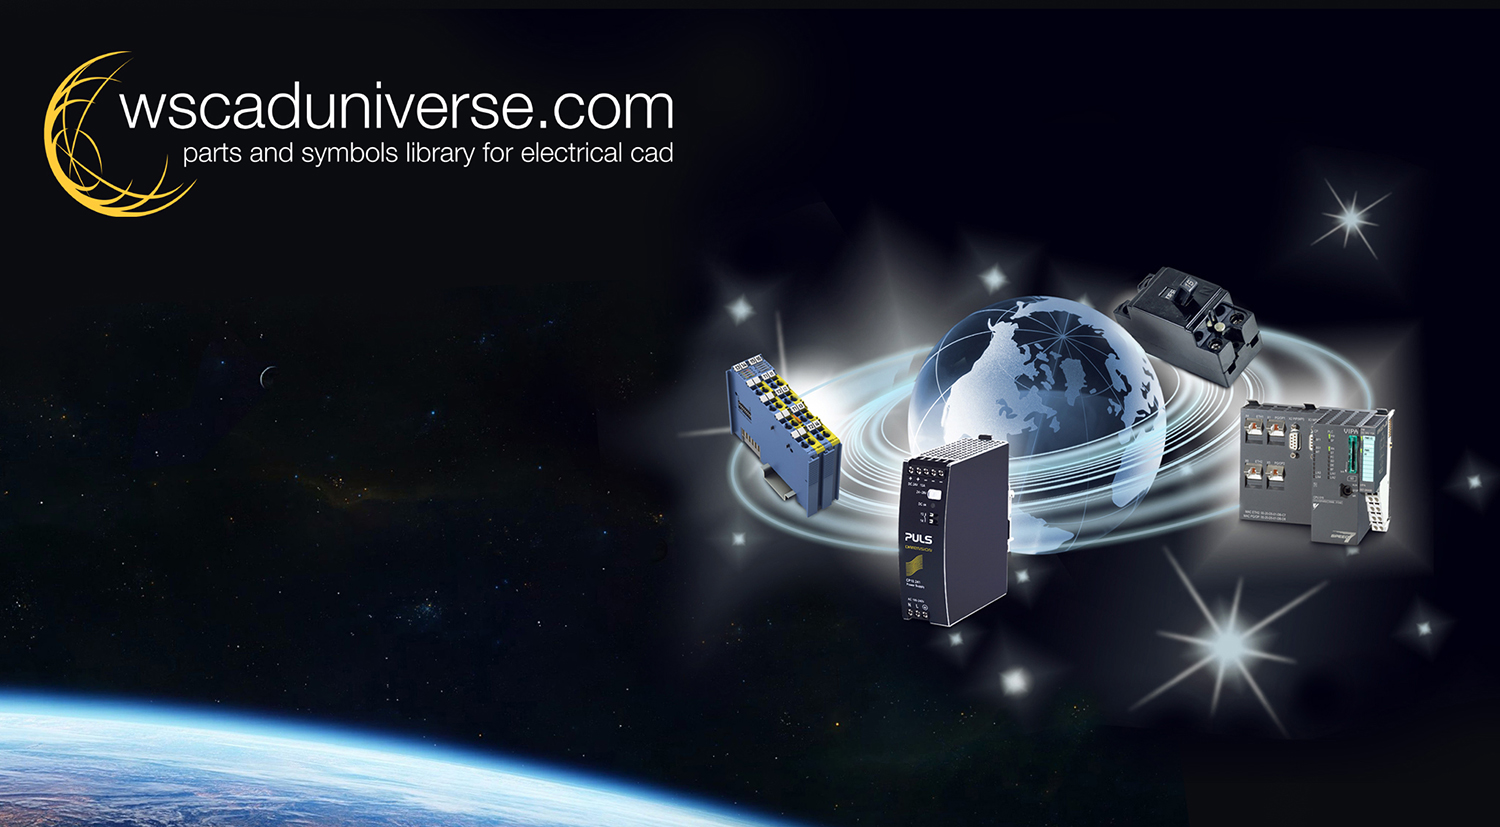 wscaduniverse.com provides users with more than 1.4 million symbols and part data items from more than 360 manufacturers – online, up-to-date and free of charge.